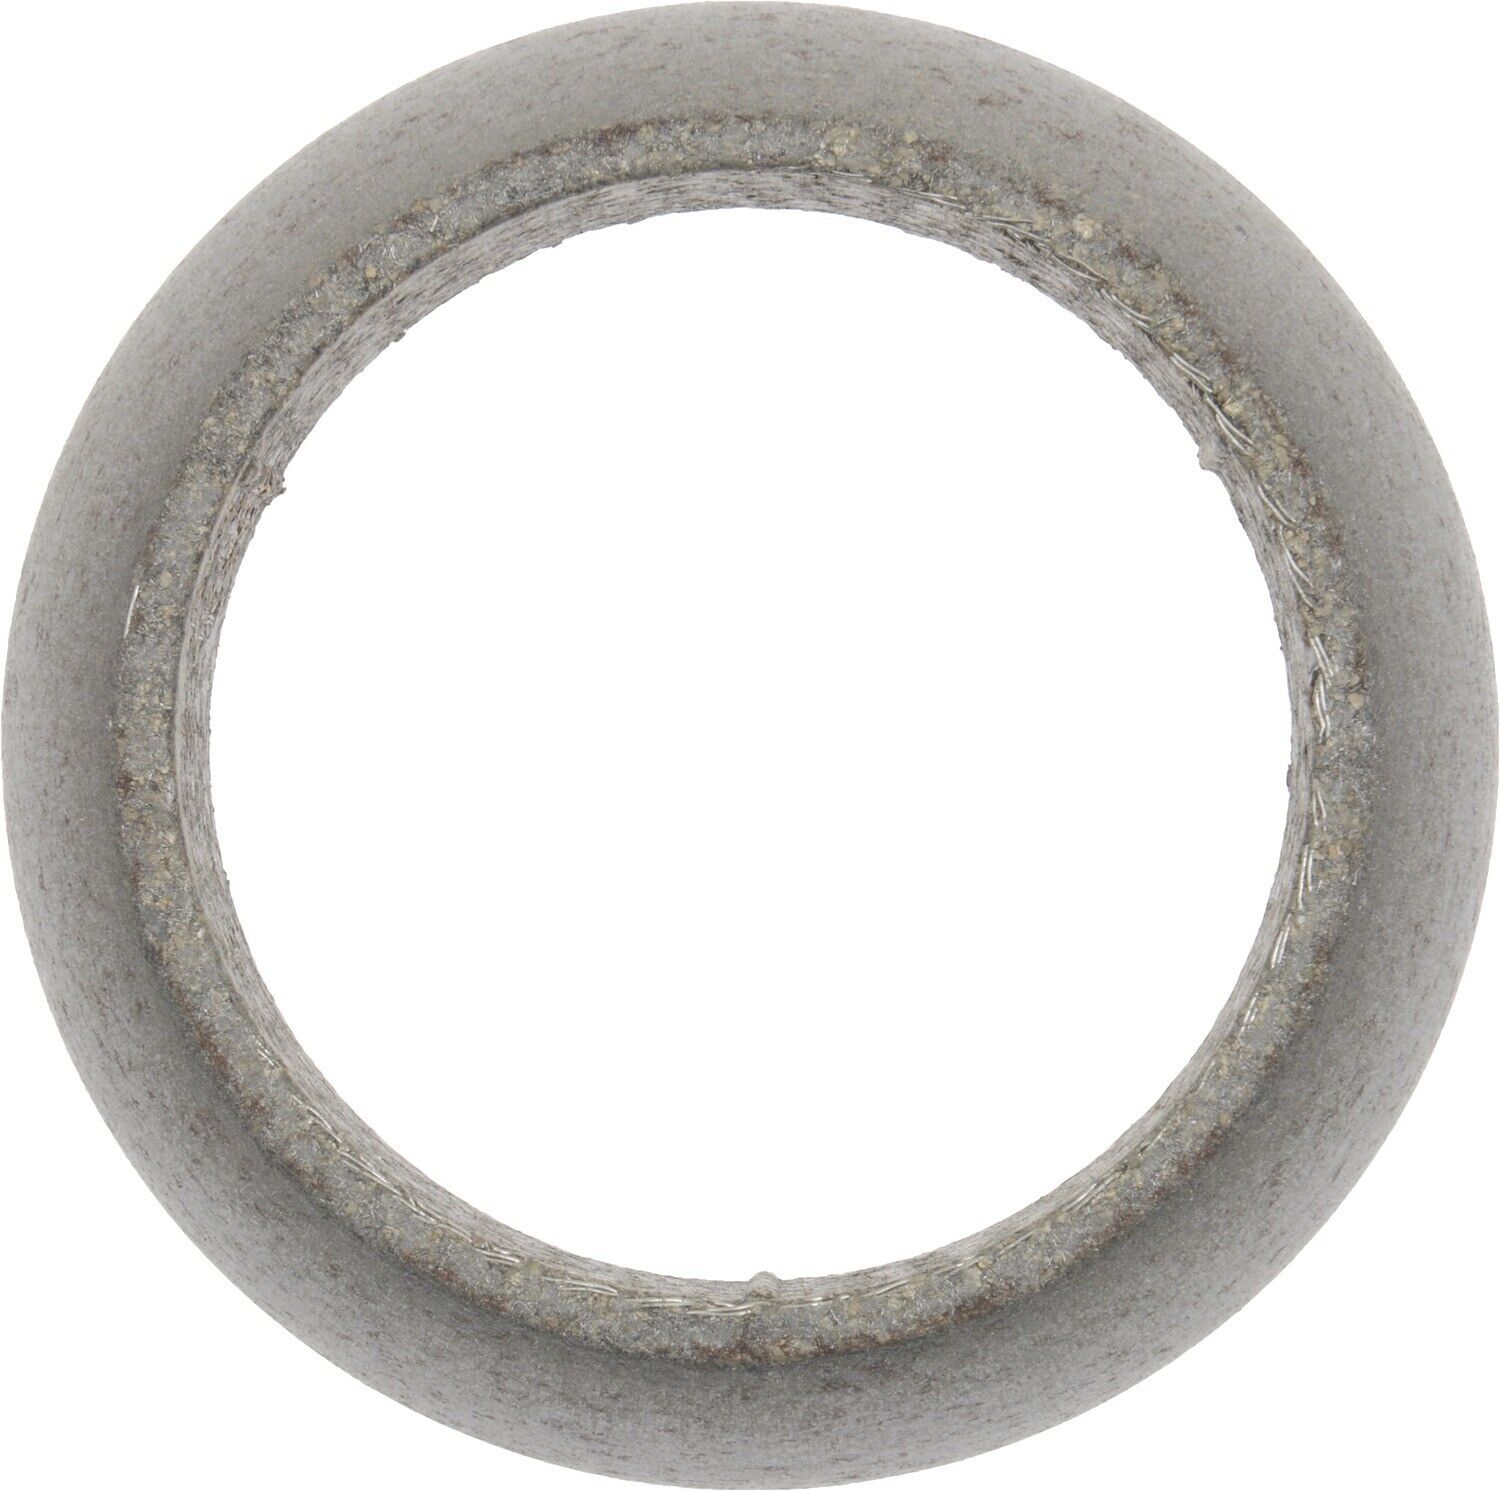 Victor Reinz Exhaust Pipe Flange Gasket for CTS, SRX, STS, 9-4X 71-15790-00